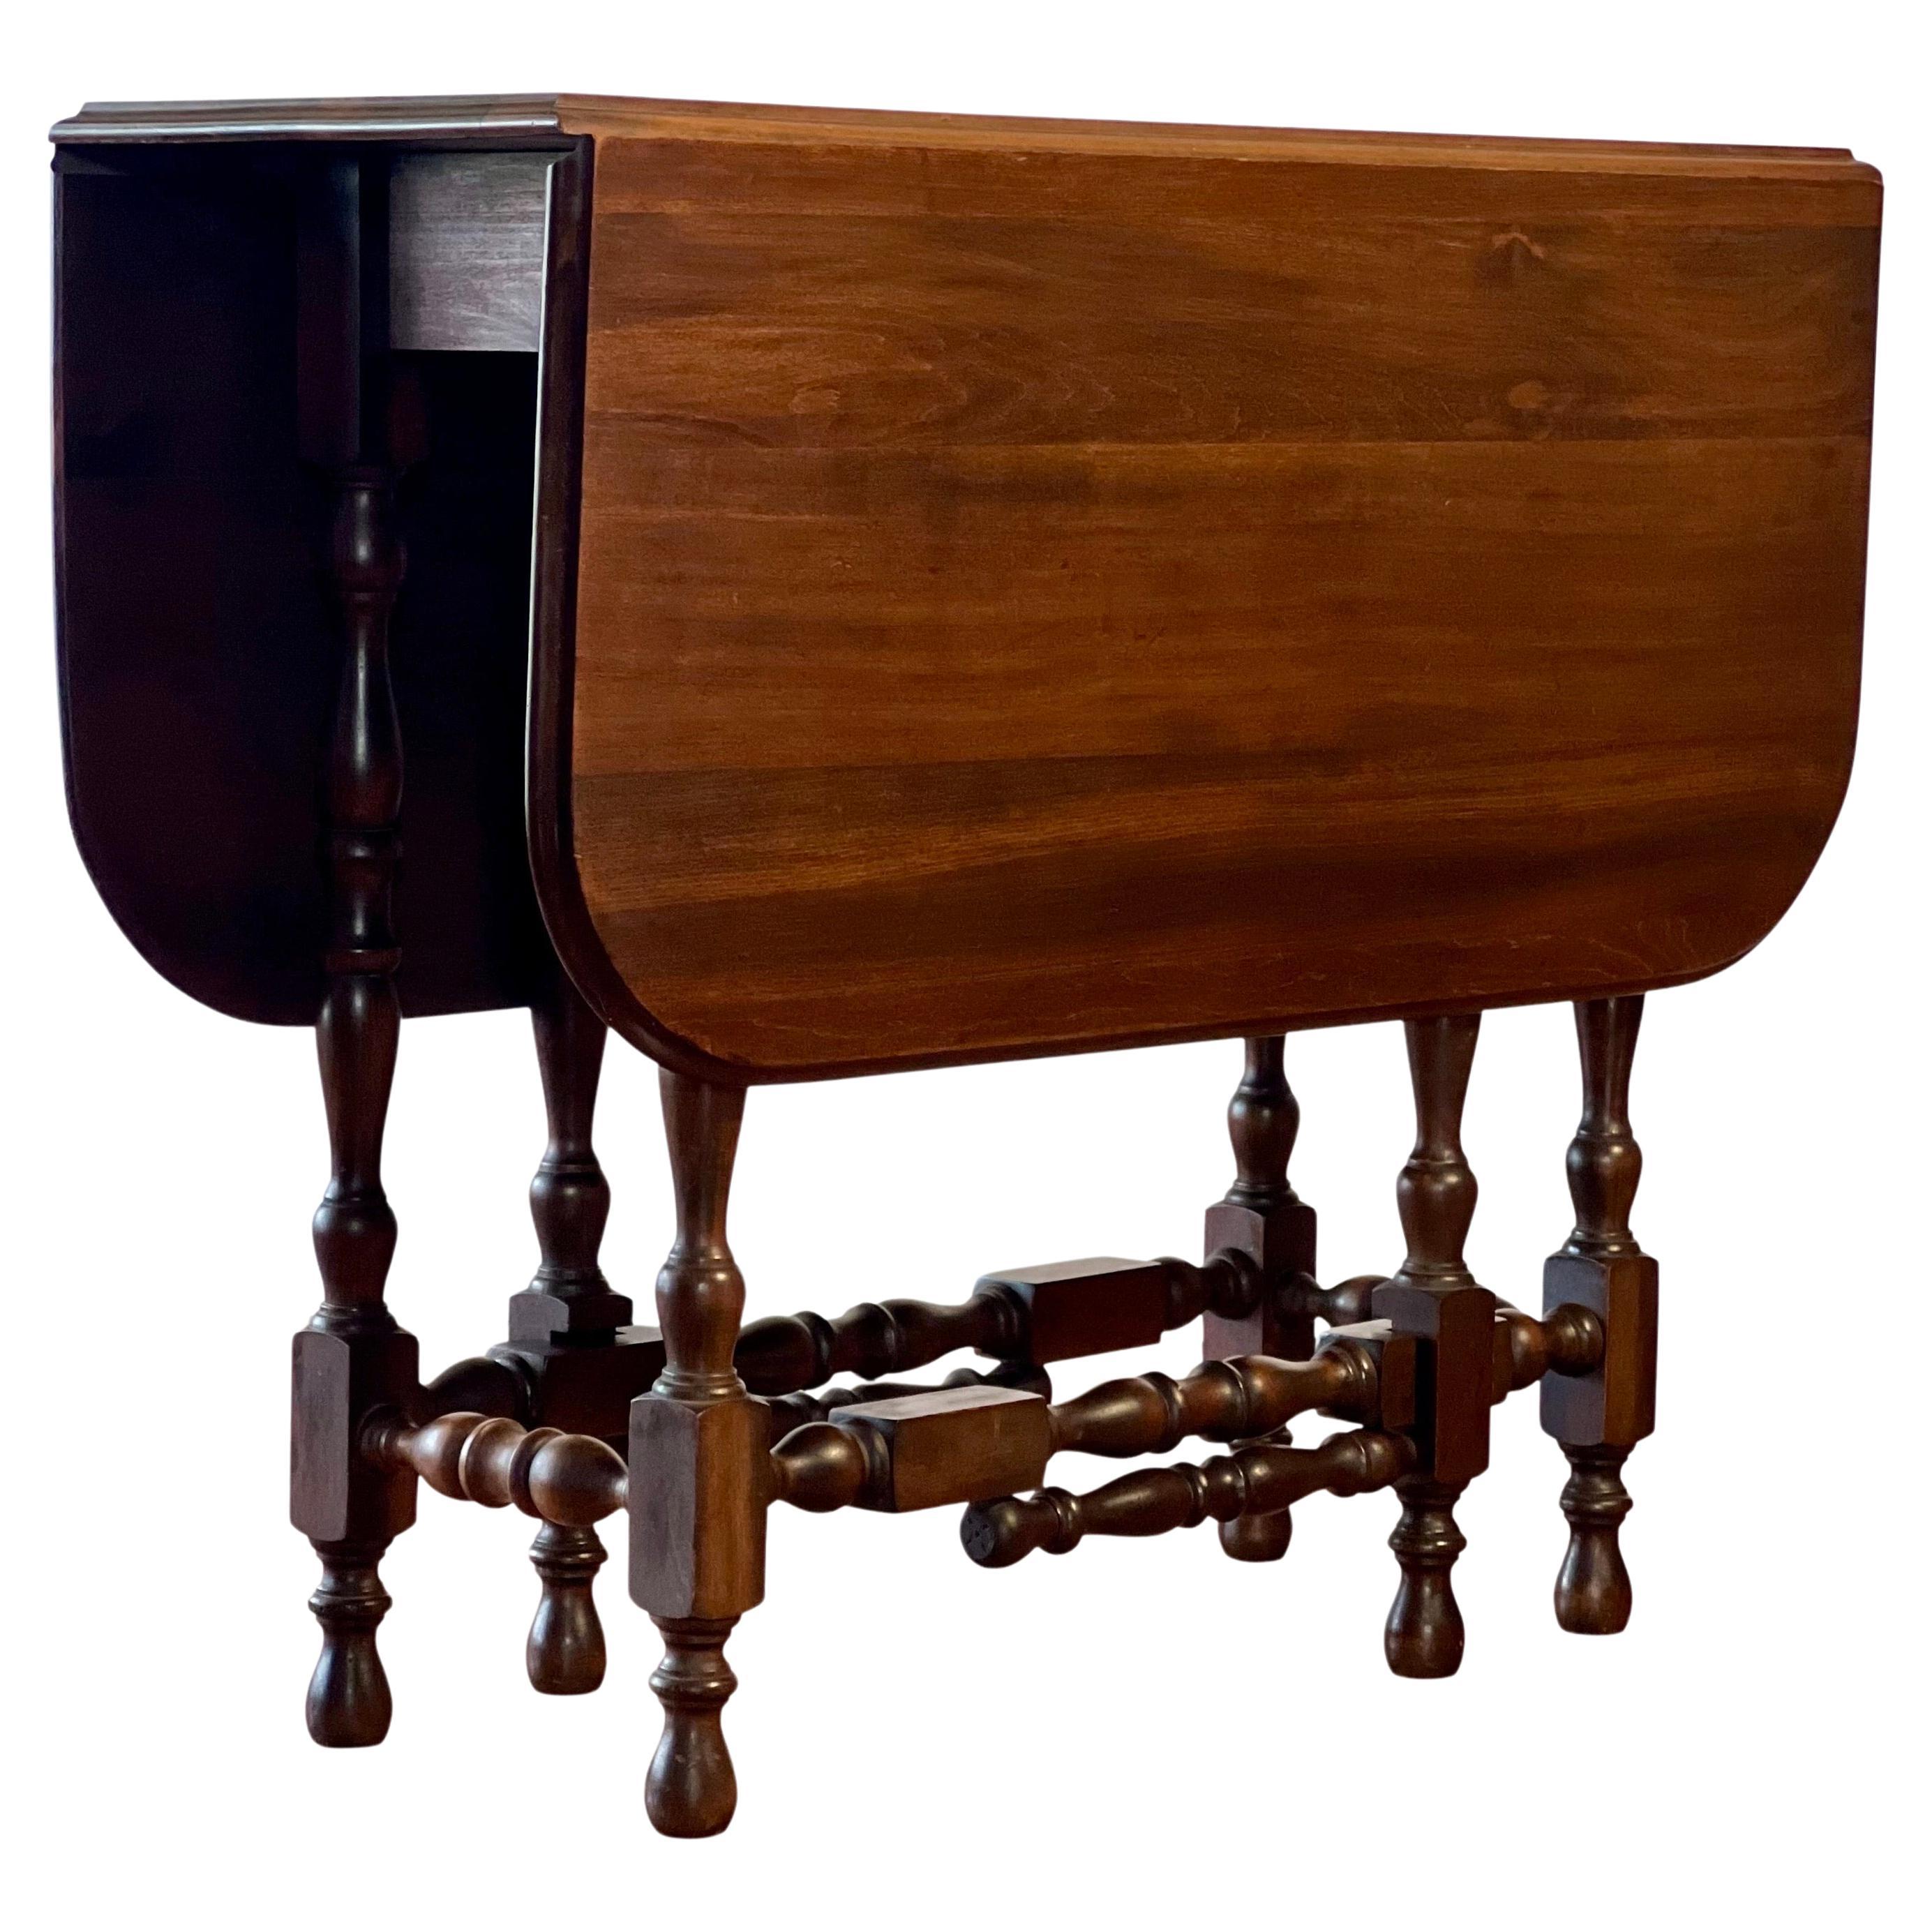 Early 20th Century American William and Mary Style Chestnut Gate-Leg Table For Sale